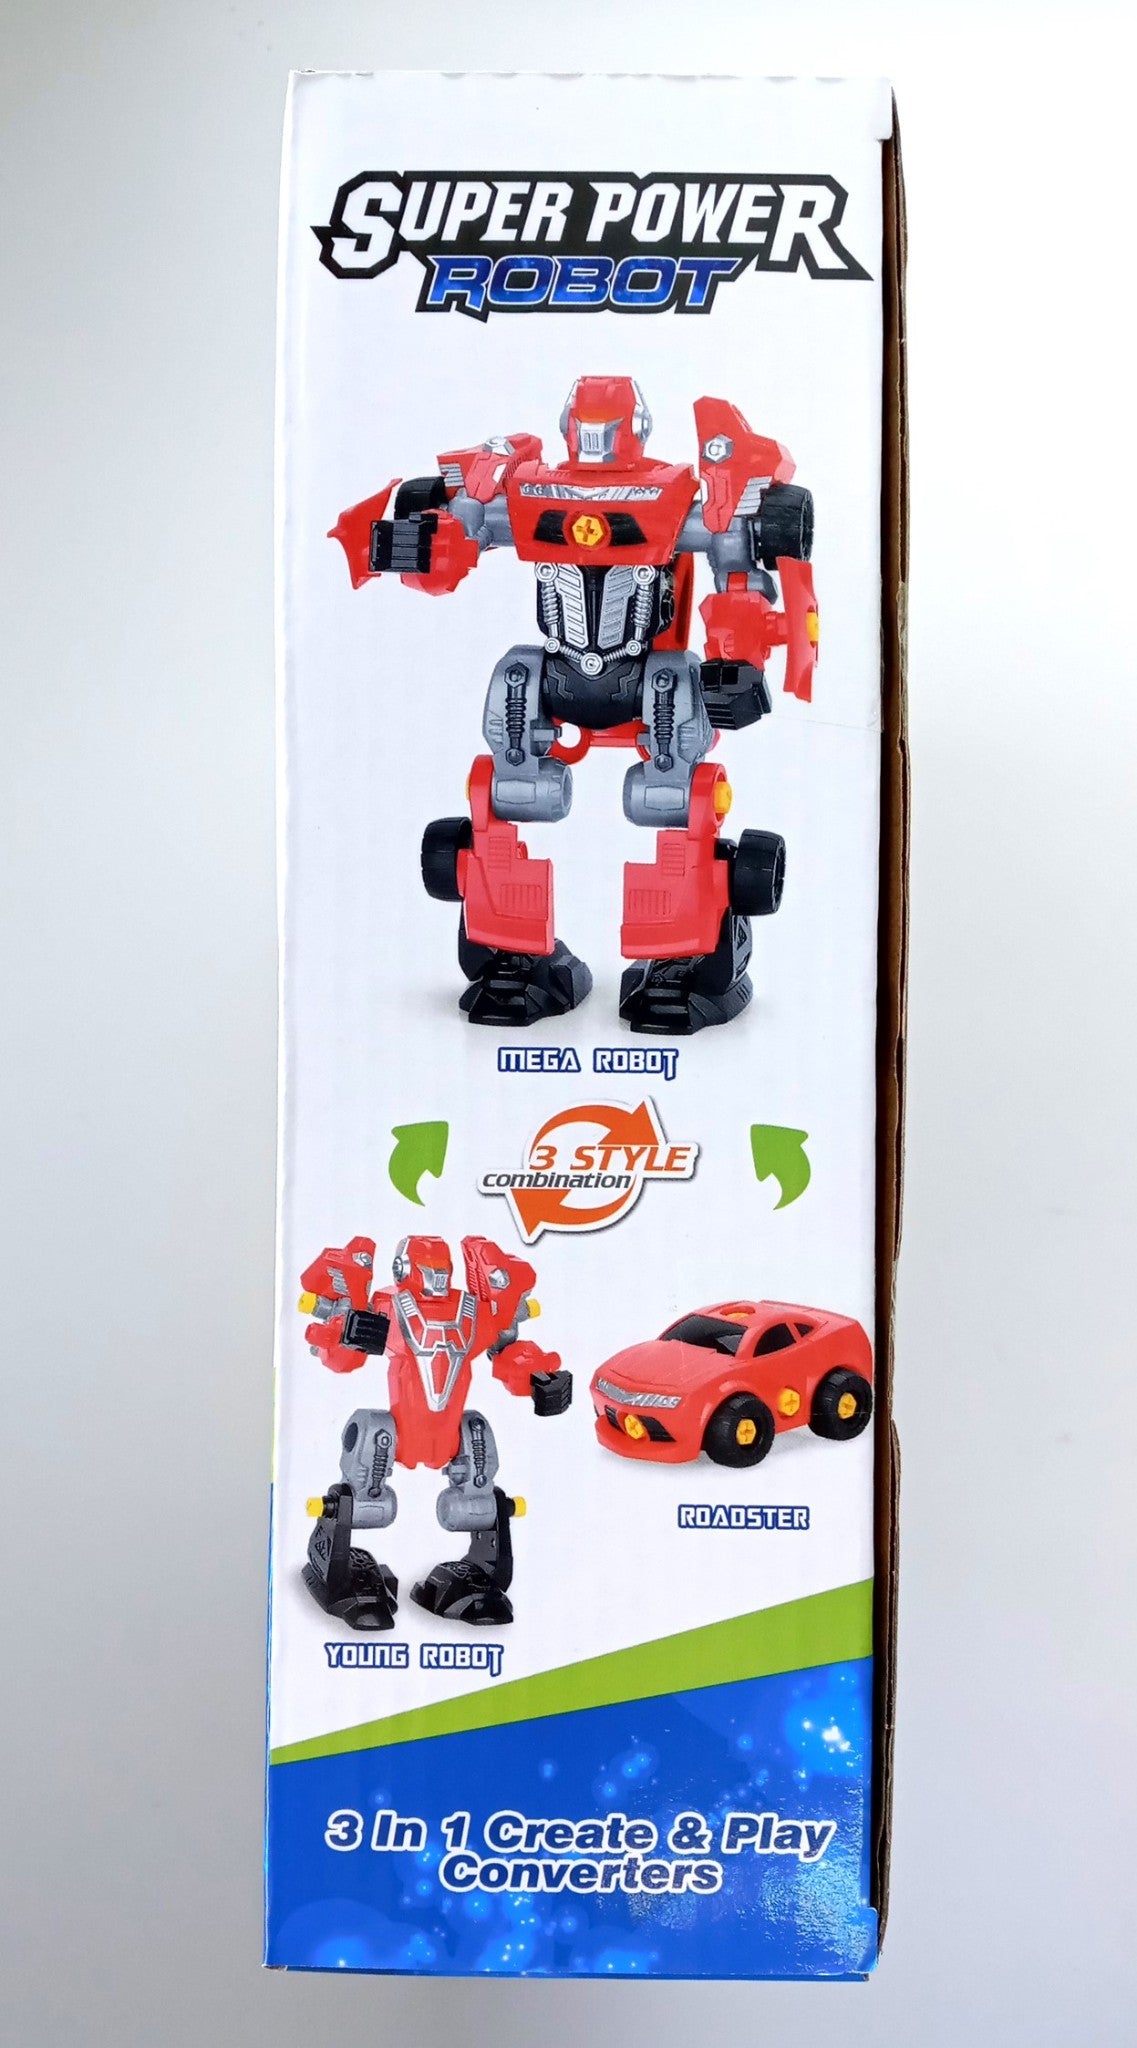 PowerTRC 3-in-1 Take Apart Robot & Truck Toy with Screwdriver & Power Drill